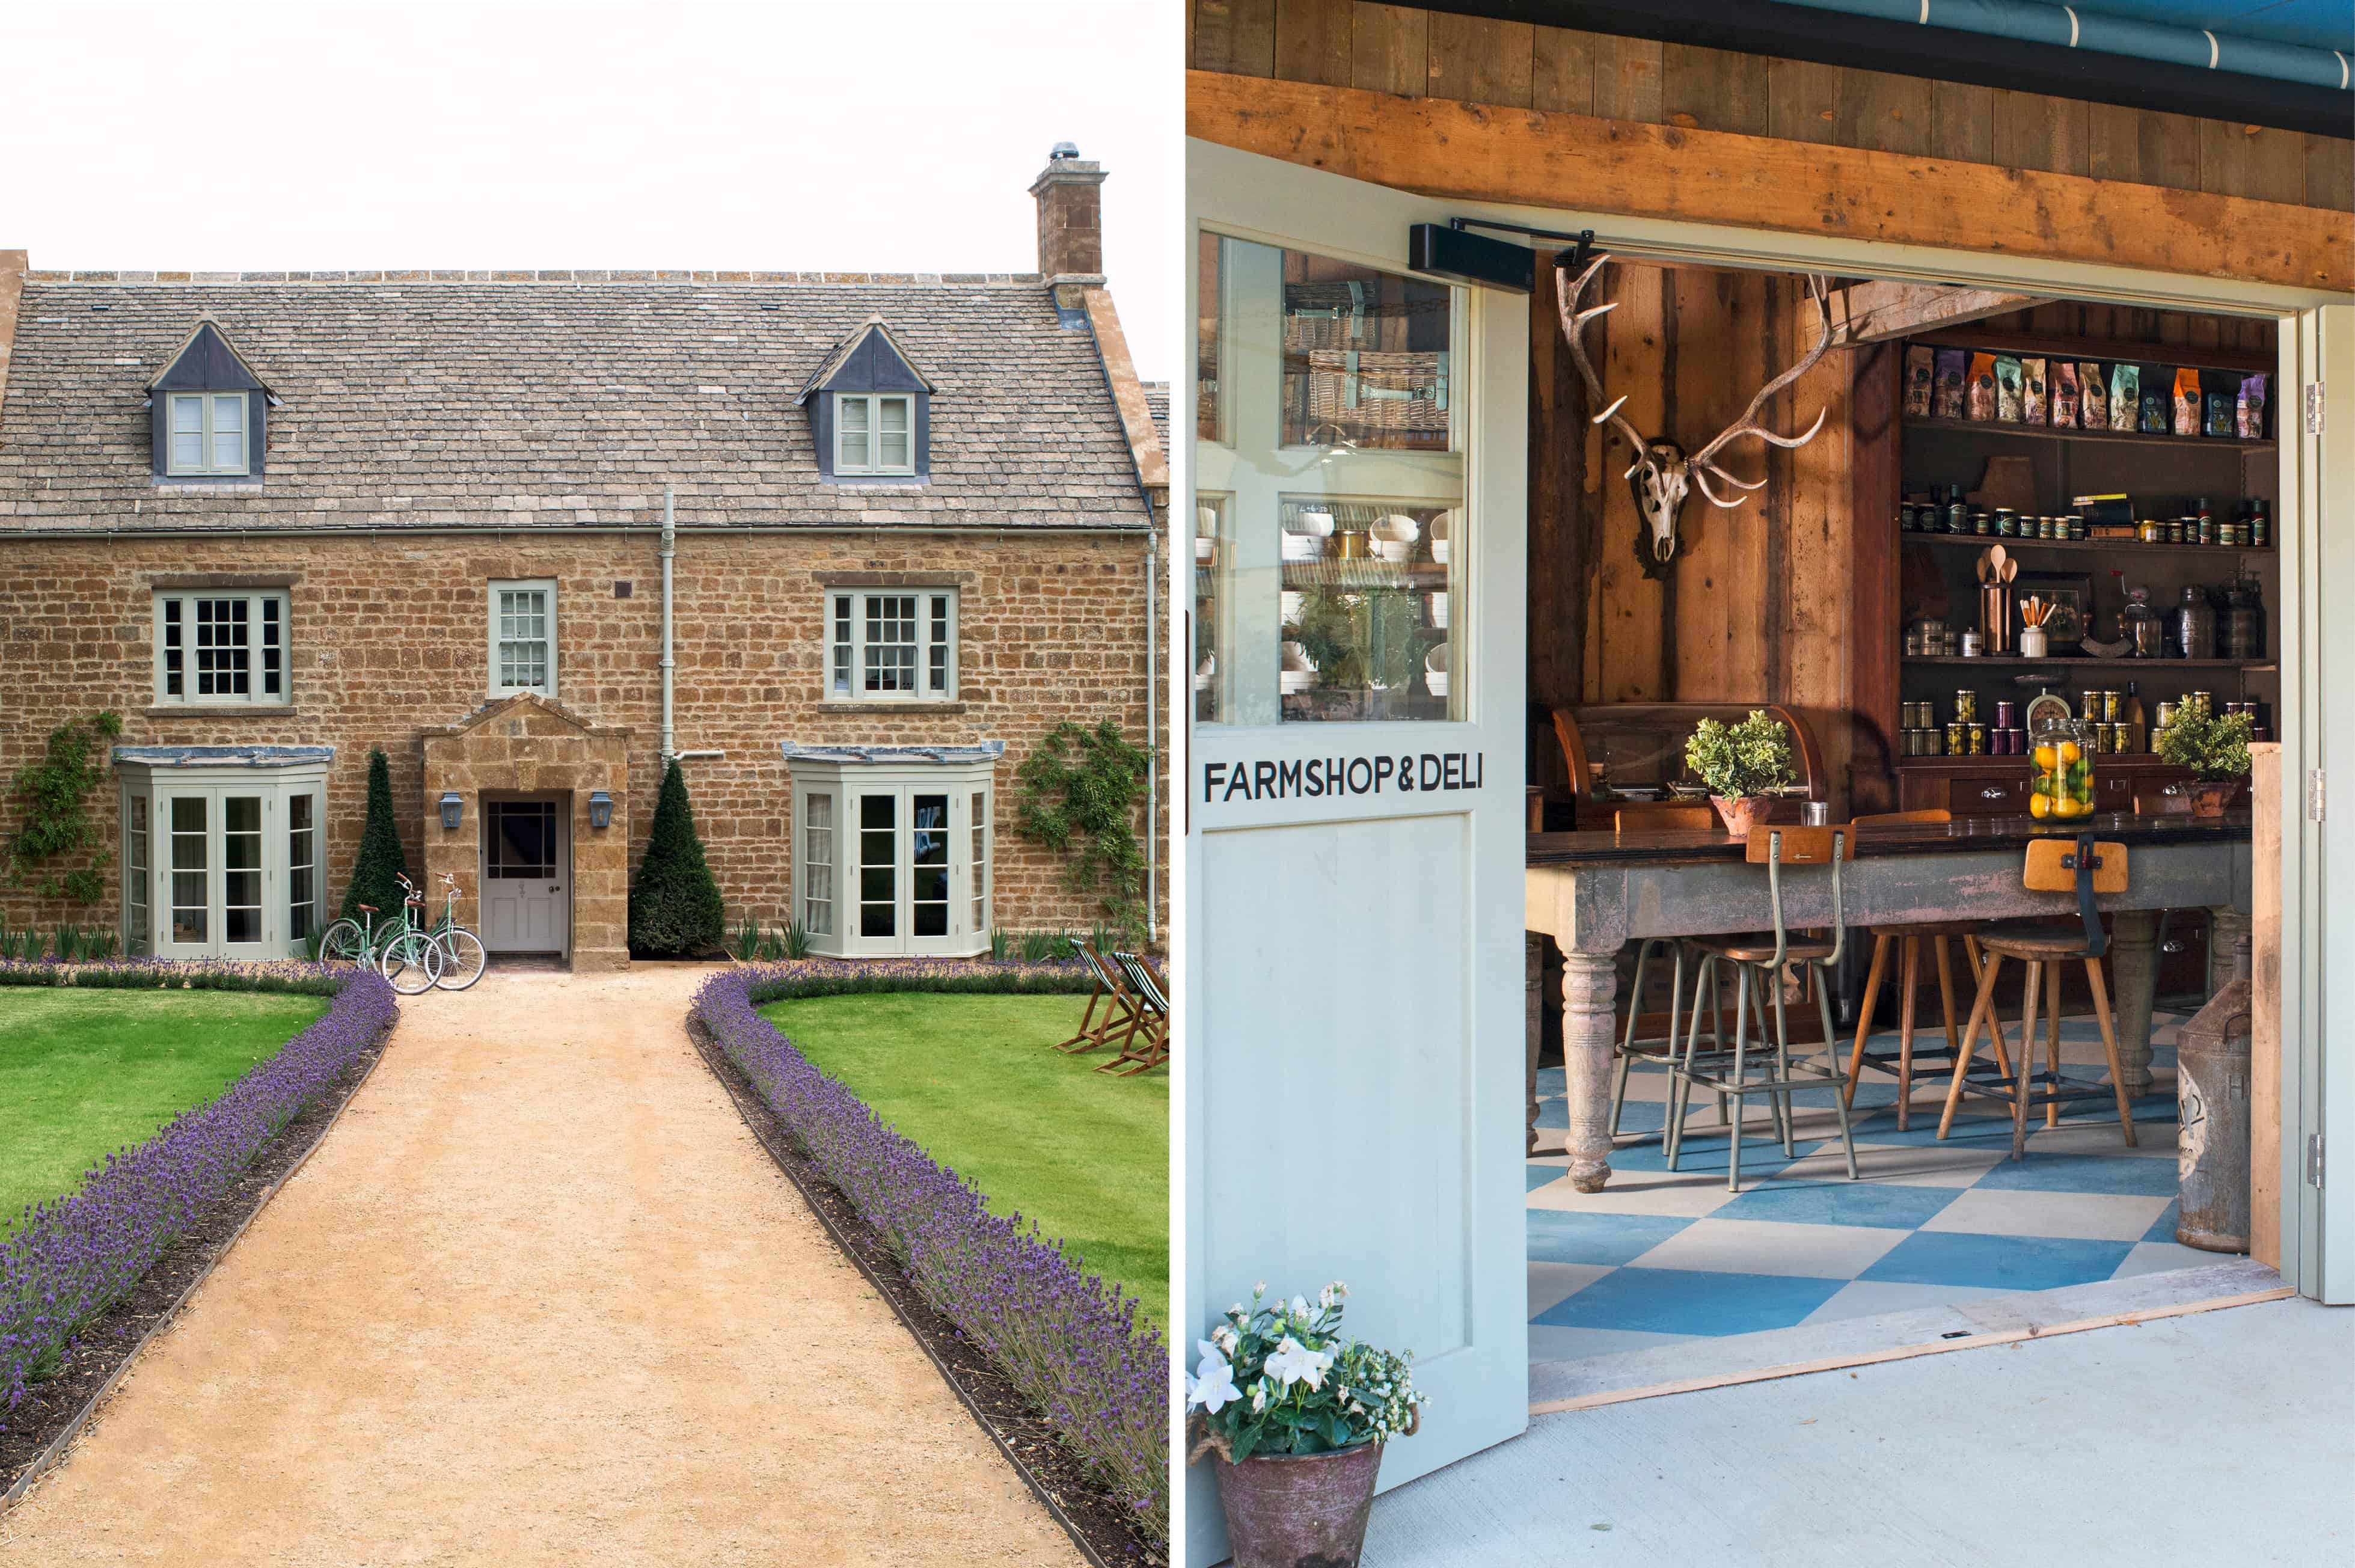 Soho Farmhouse exterior and interior in The Cotswolds, Britain